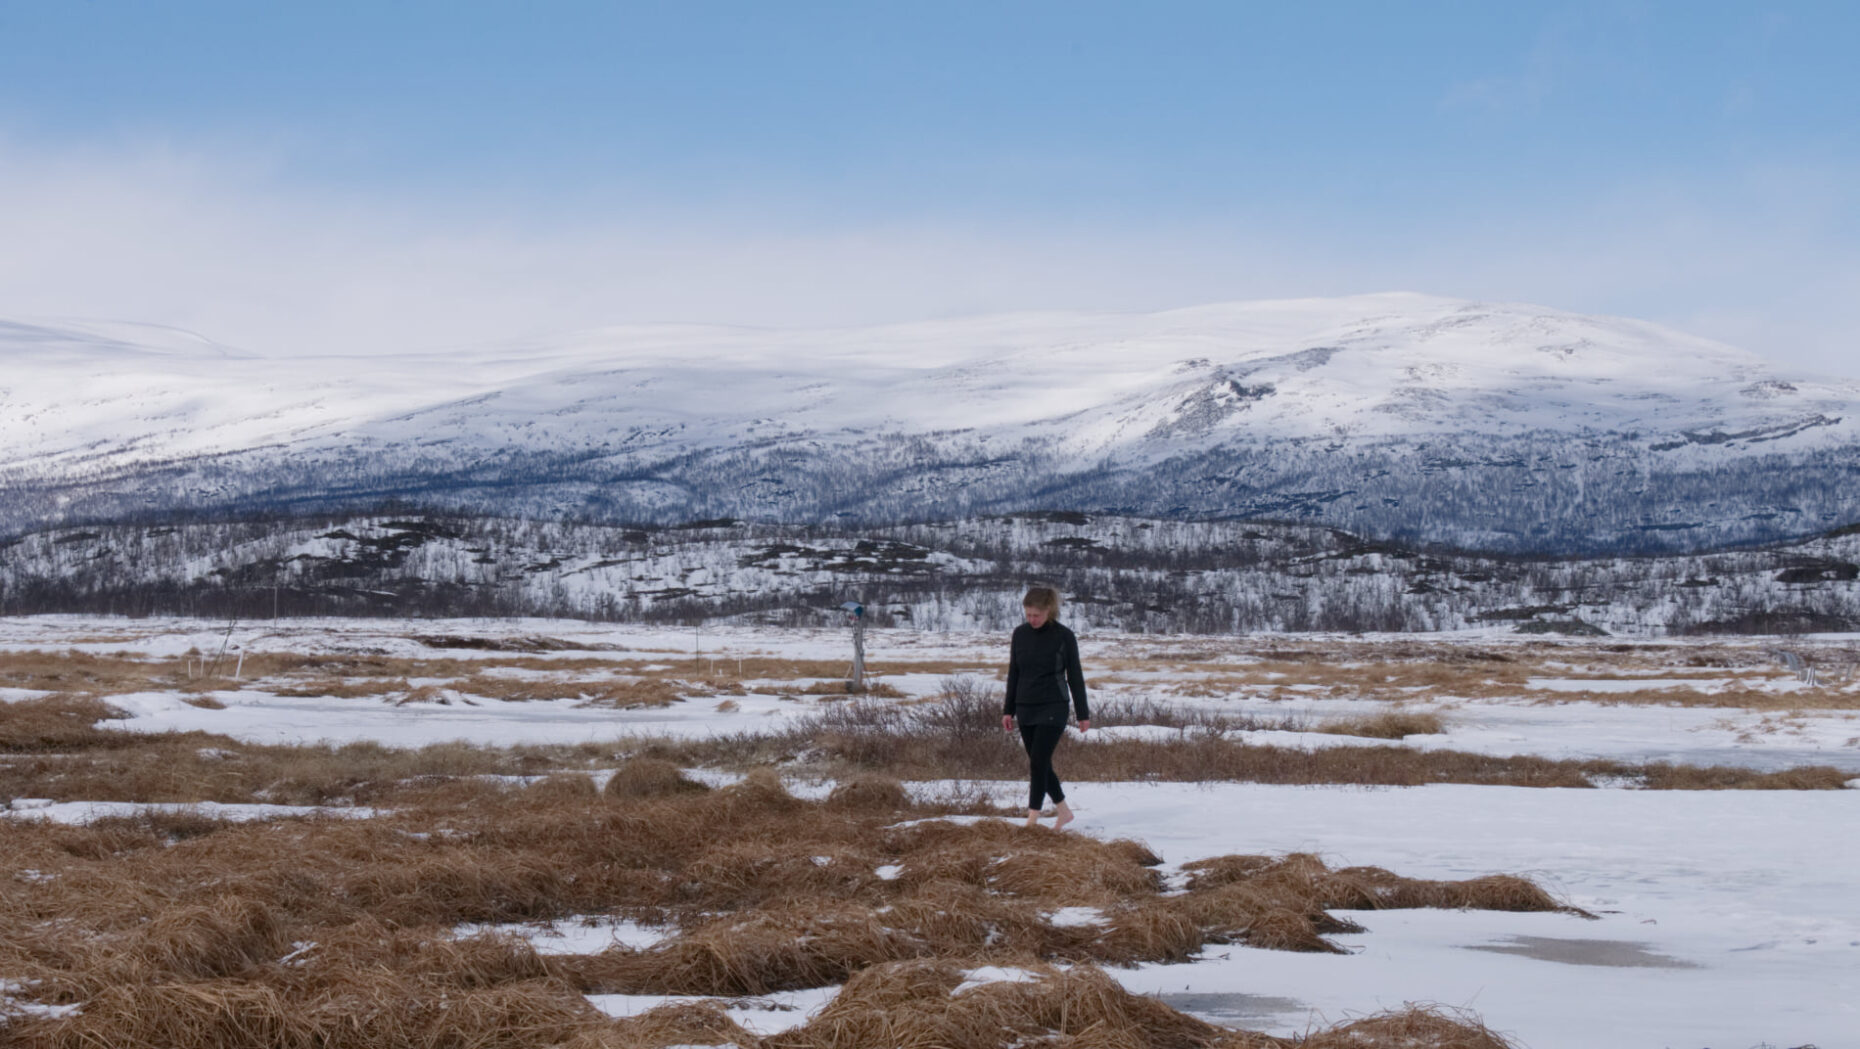 Walking with permafrost on the site of Abisko. The permafrost have thawn for a meter in this location, Stordalen, 2022. Photo by Yongmei Gong